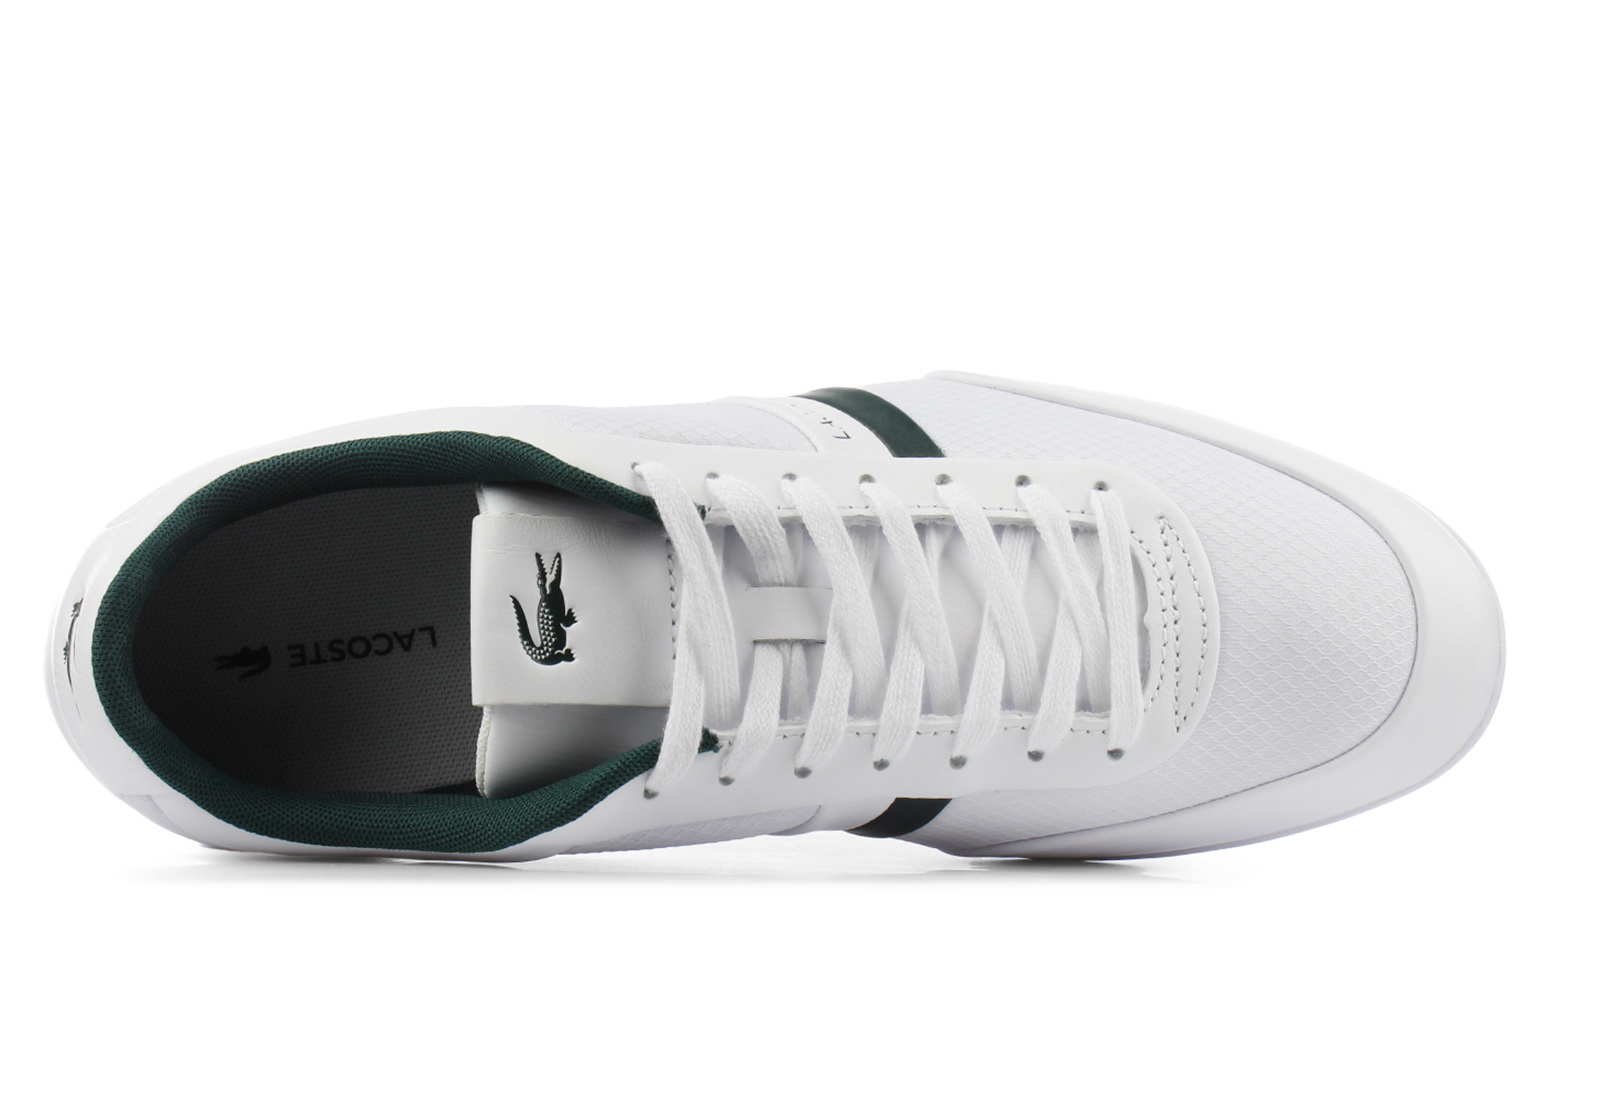 Lacoste Shoes - Storda - 741CMA0047-1R5 - Online shop for sneakers, shoes  and boots